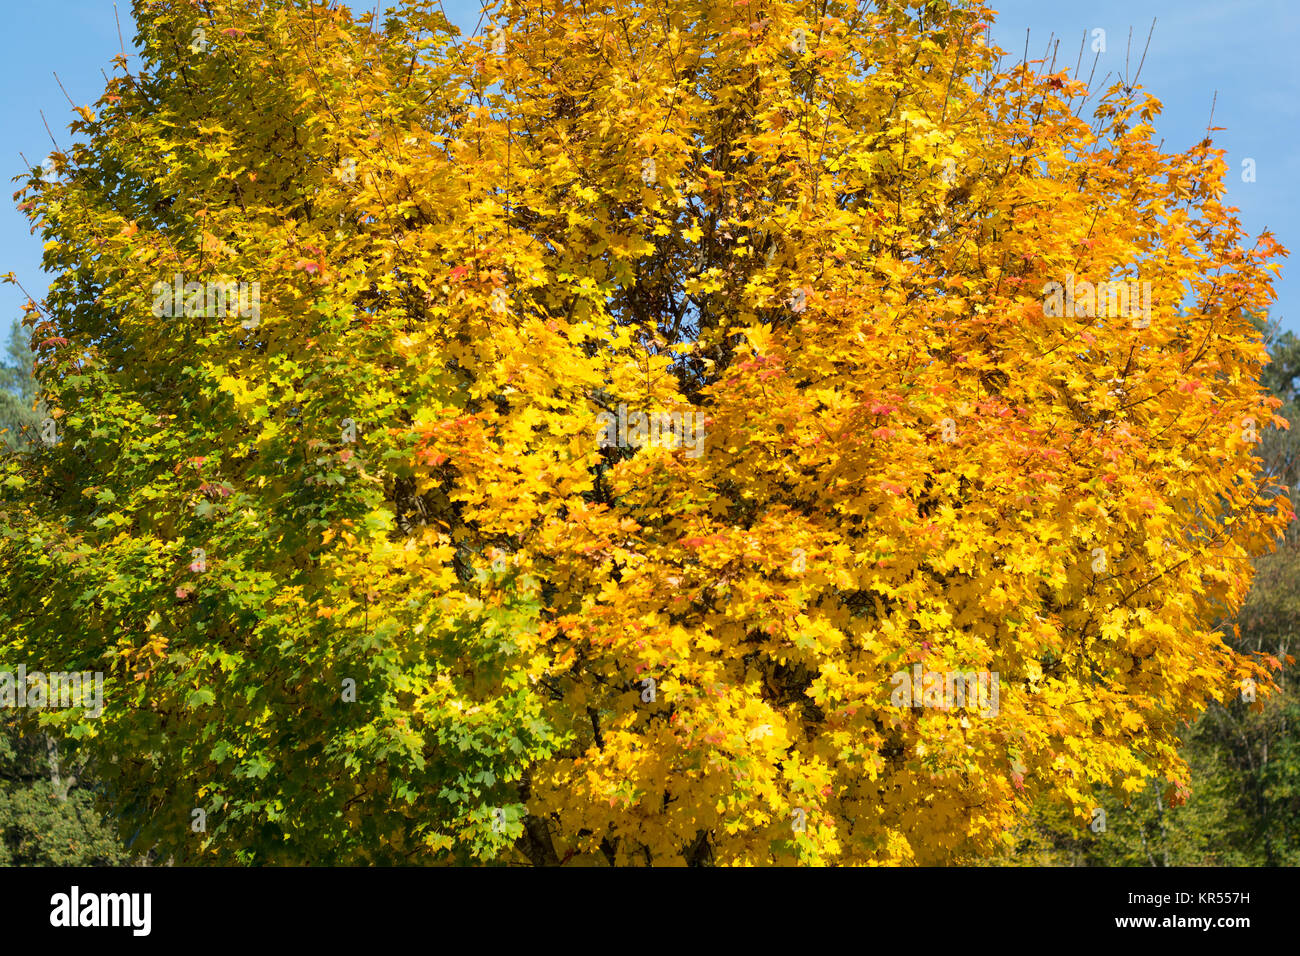 discolored foliage on the trees Stock Photo